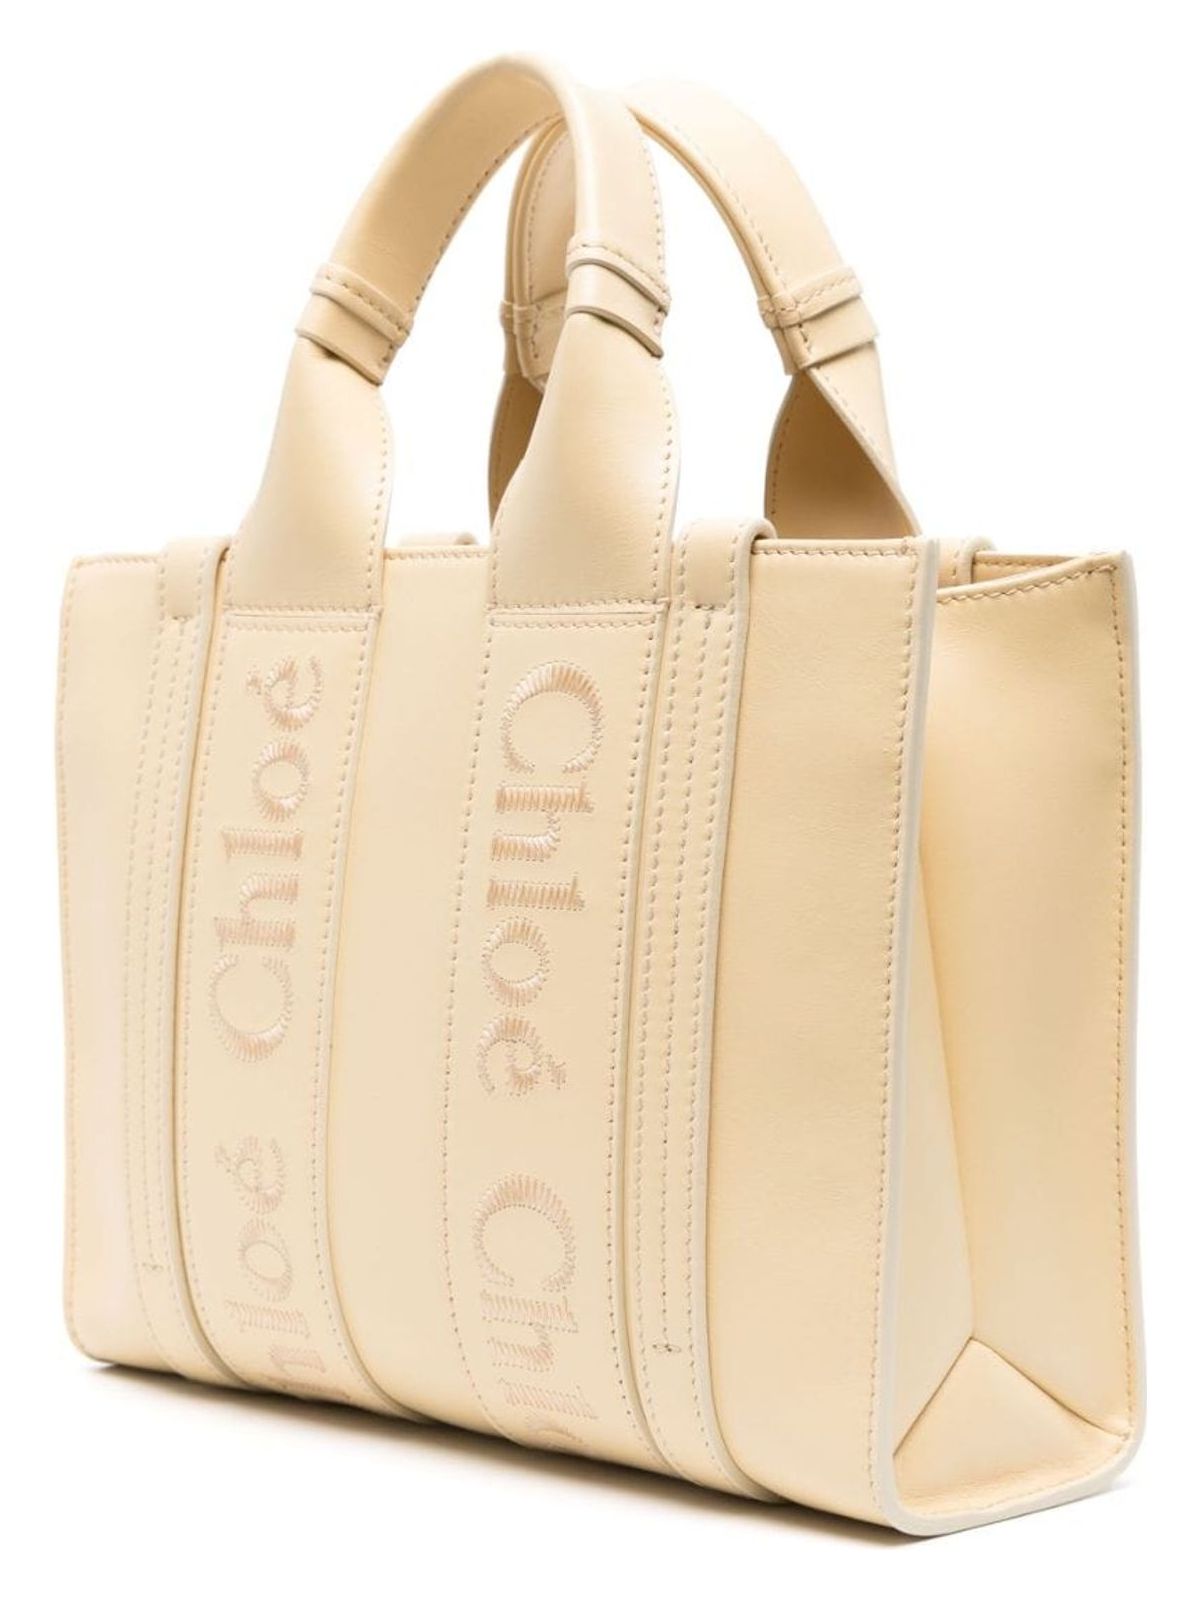 WOODY752 CHLOÉ WOODY SMALL LEATHER TOTE